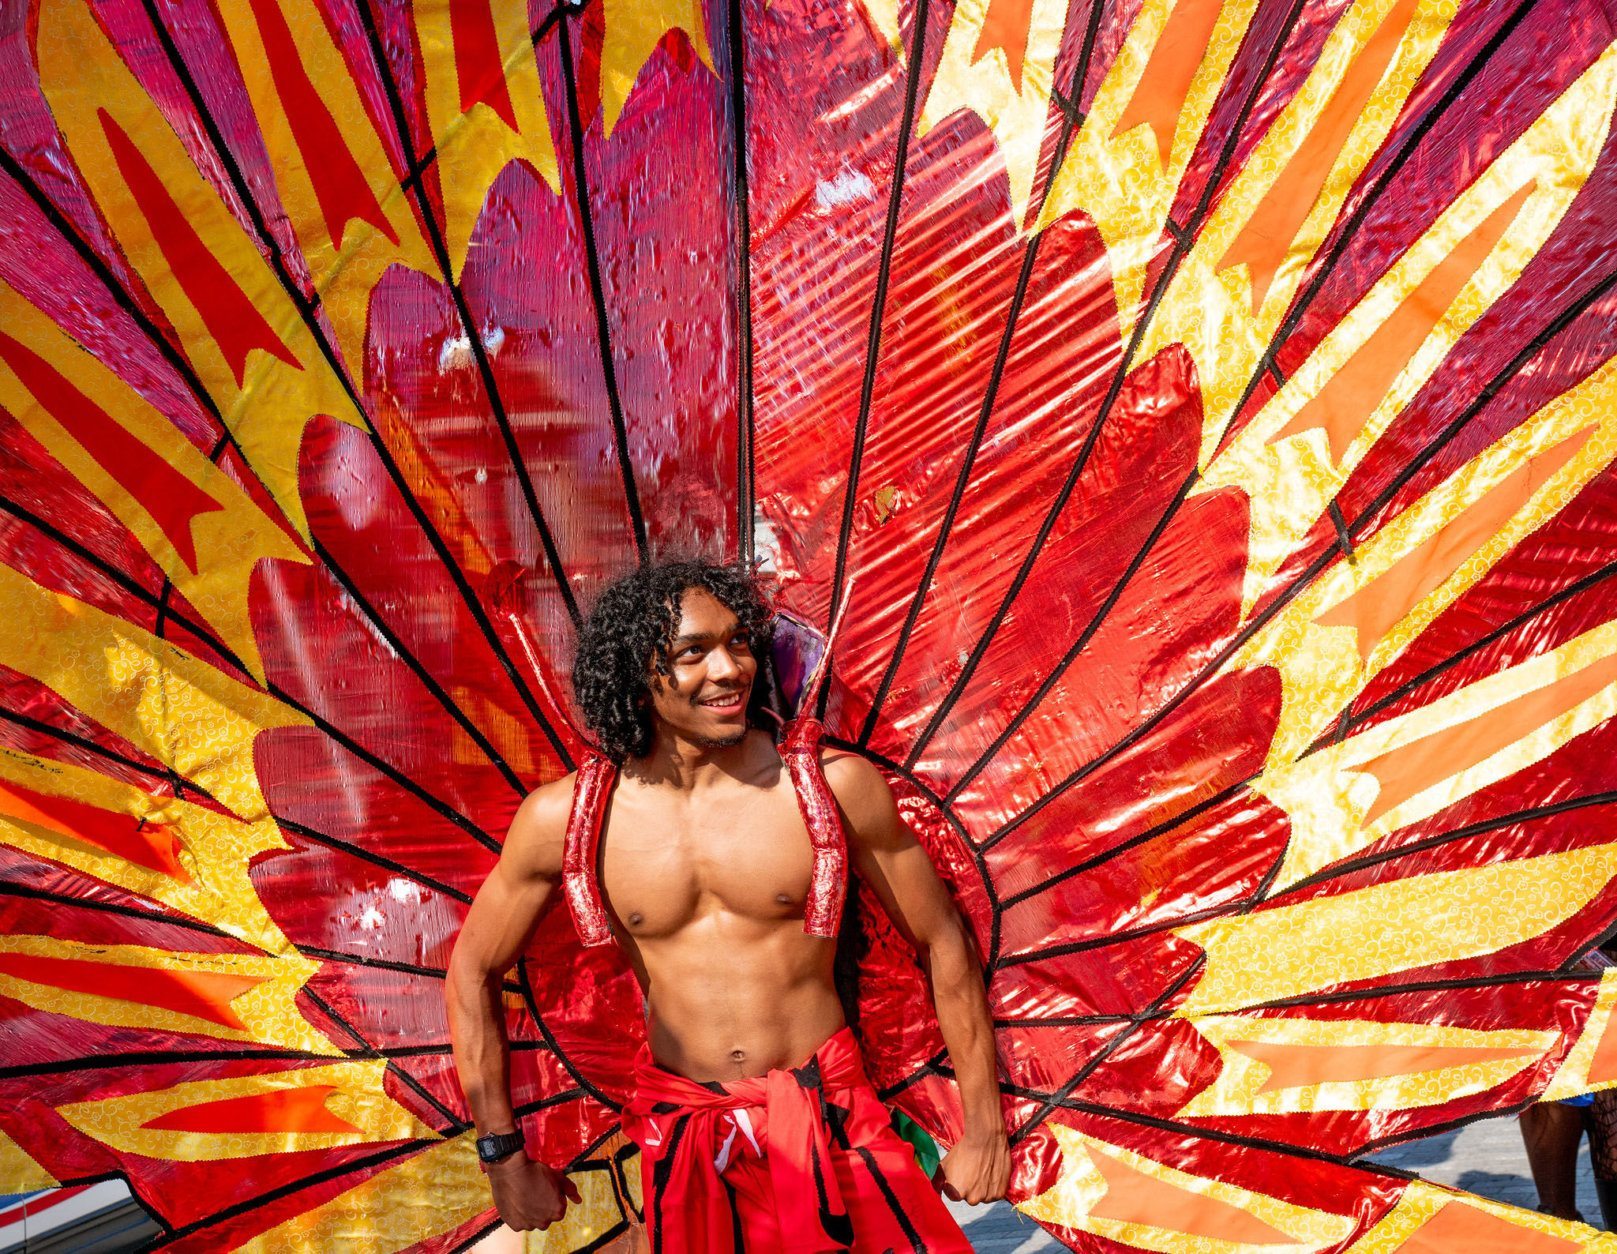 A performer from the Vava United School of Samba at the 2018 D.C. Funk Parade. (Courtesy Victoria Pickering)